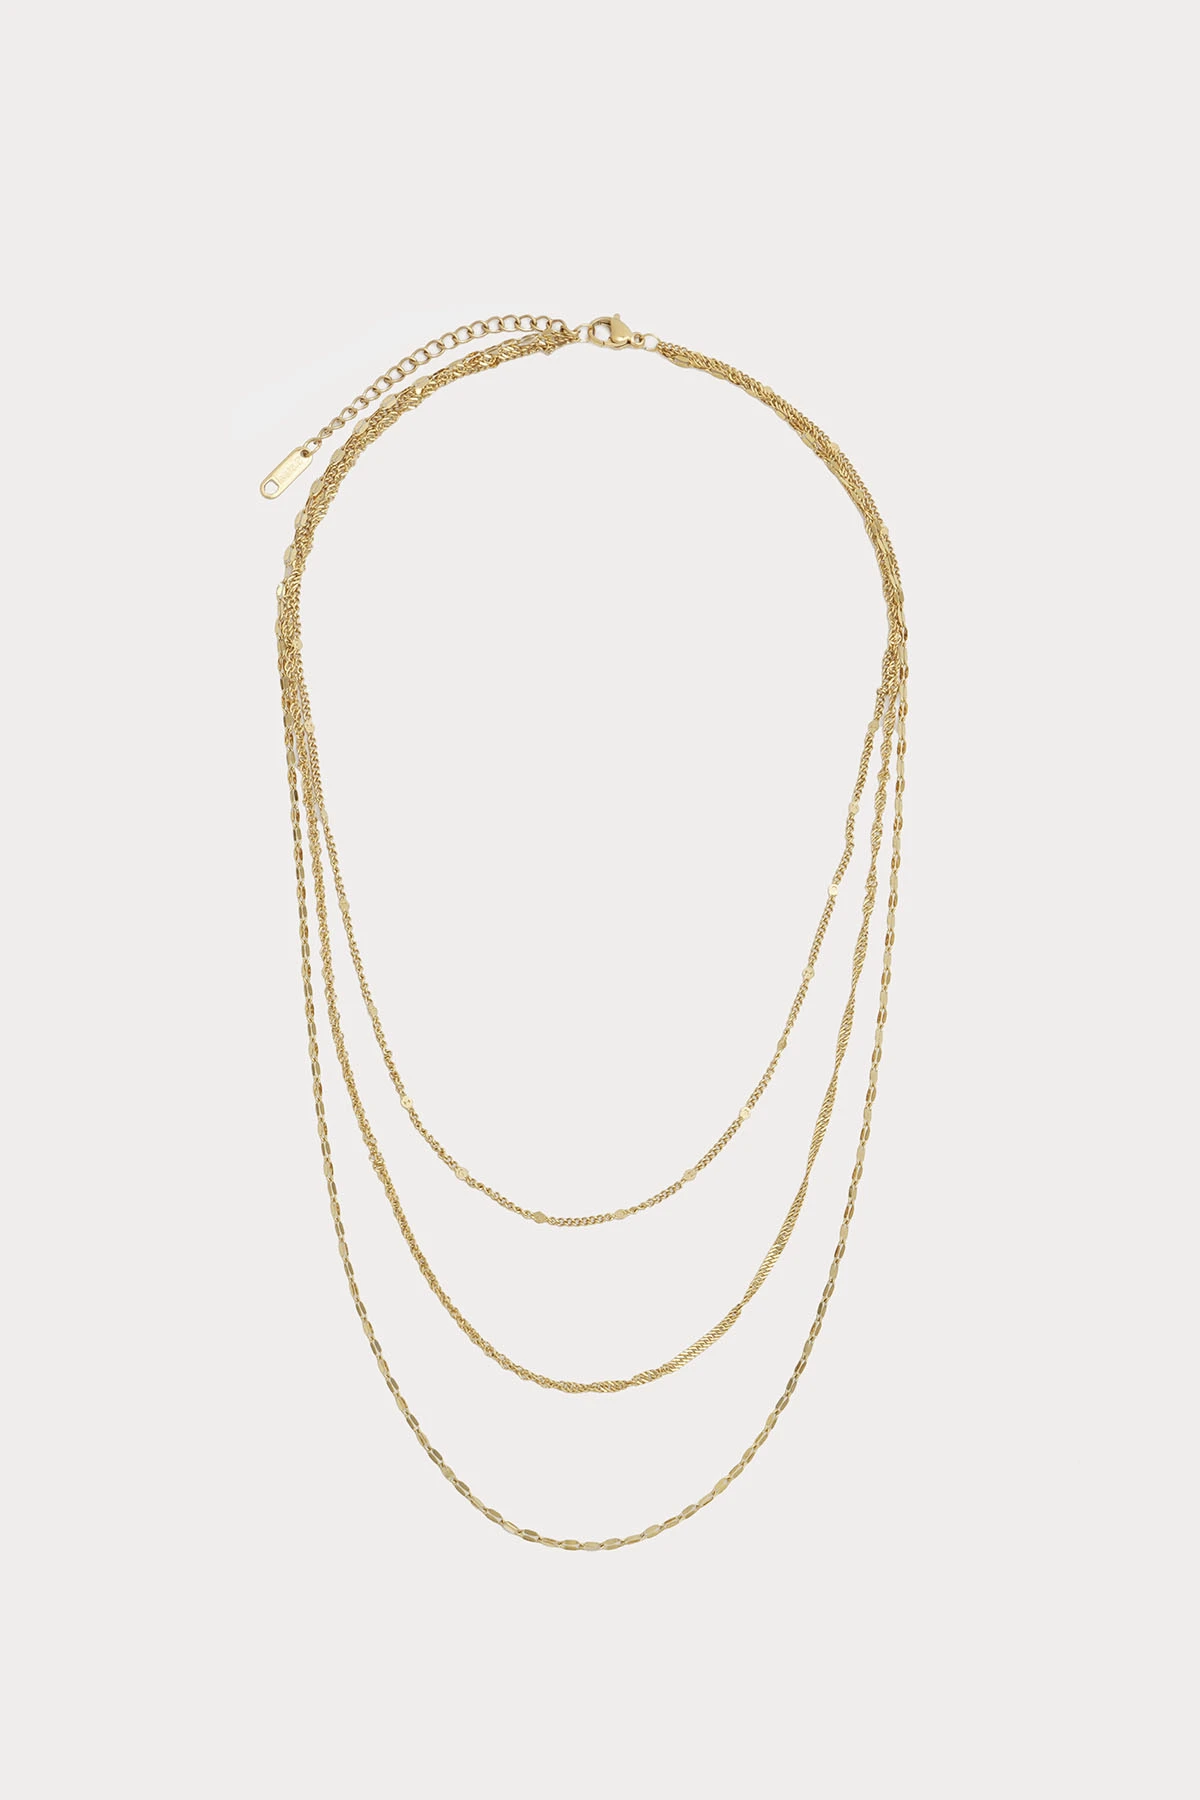 Petit Moments - Allegra Necklace - Gold